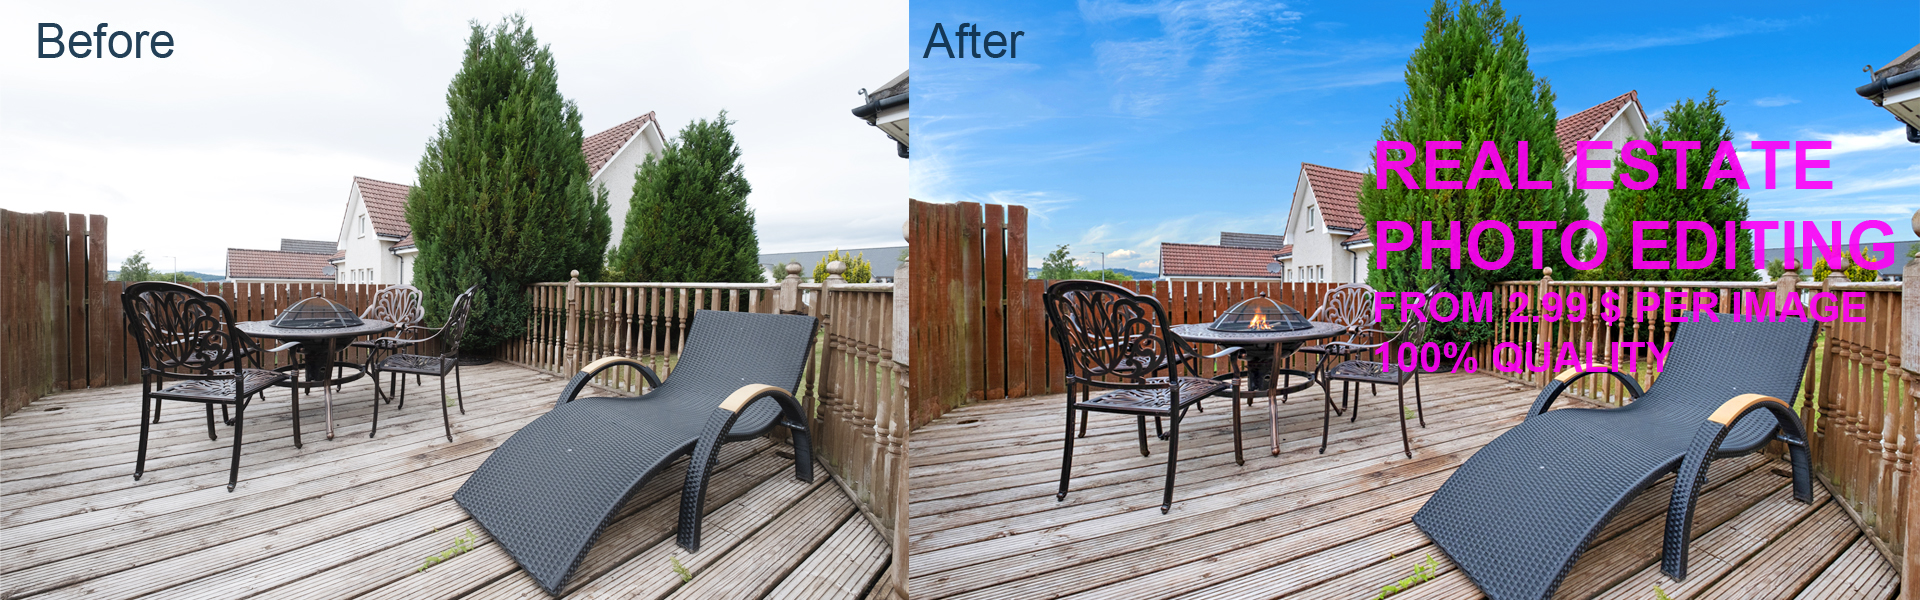 11 Real estate photo editing services